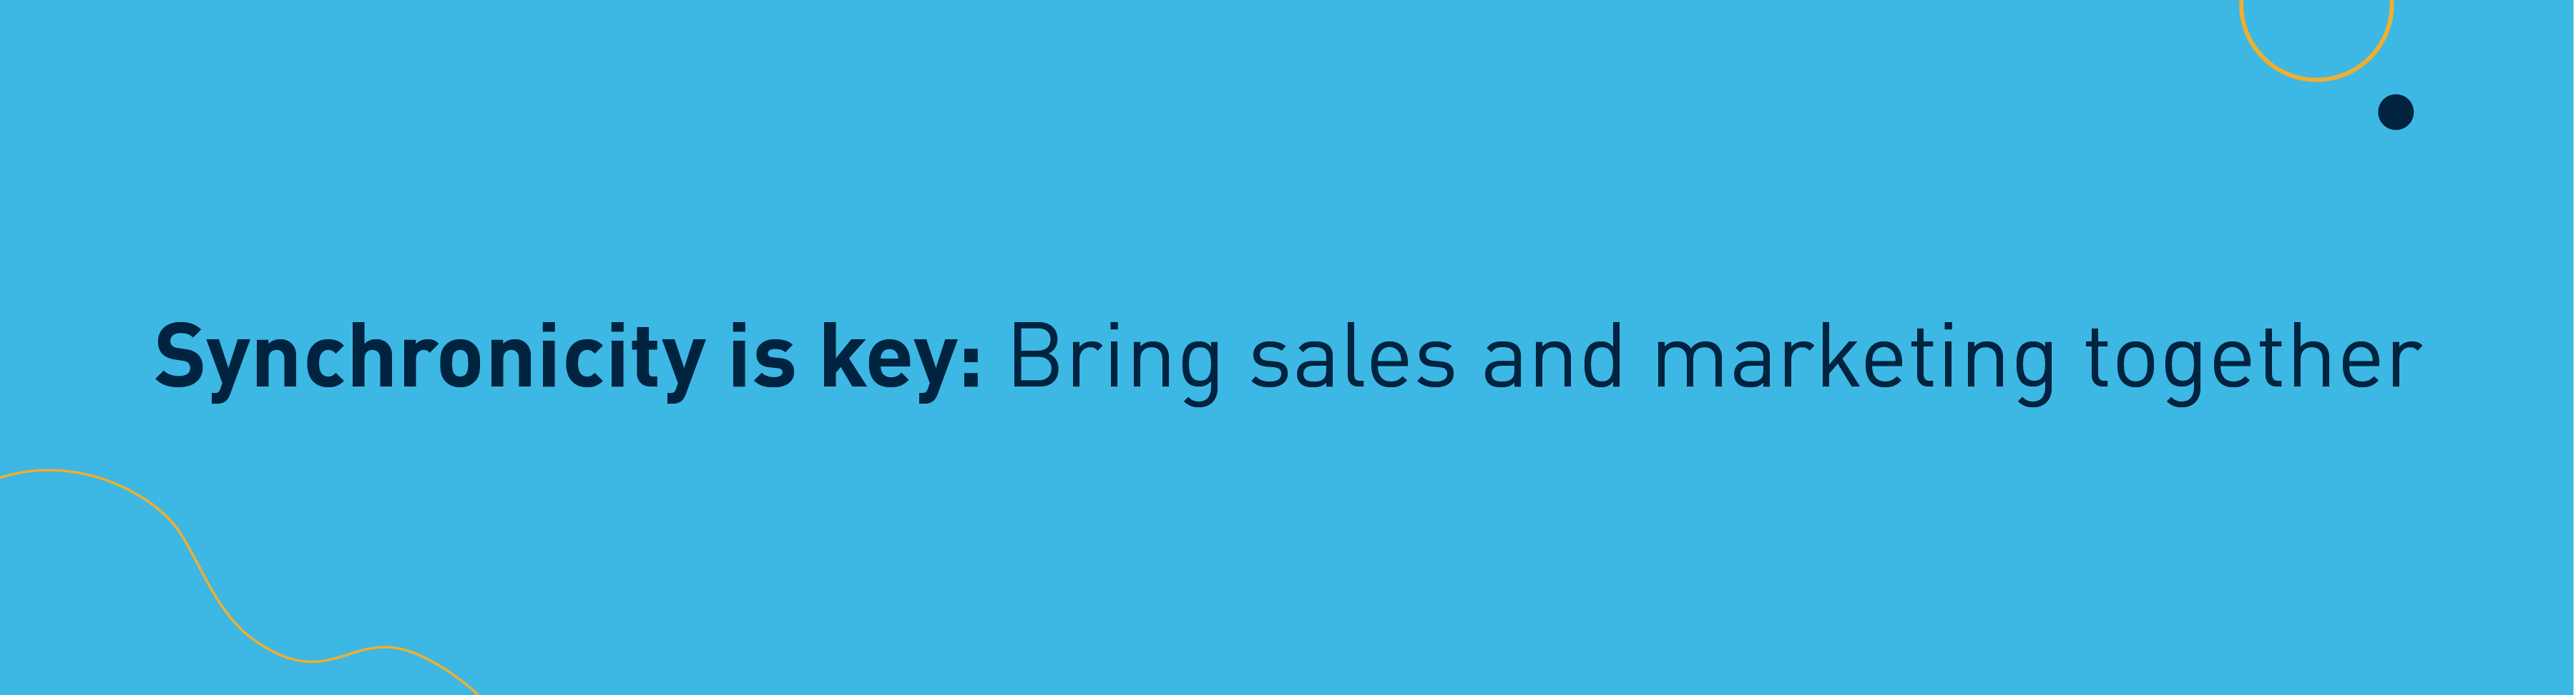 Synchronicity is key: Bring sales and marketing together